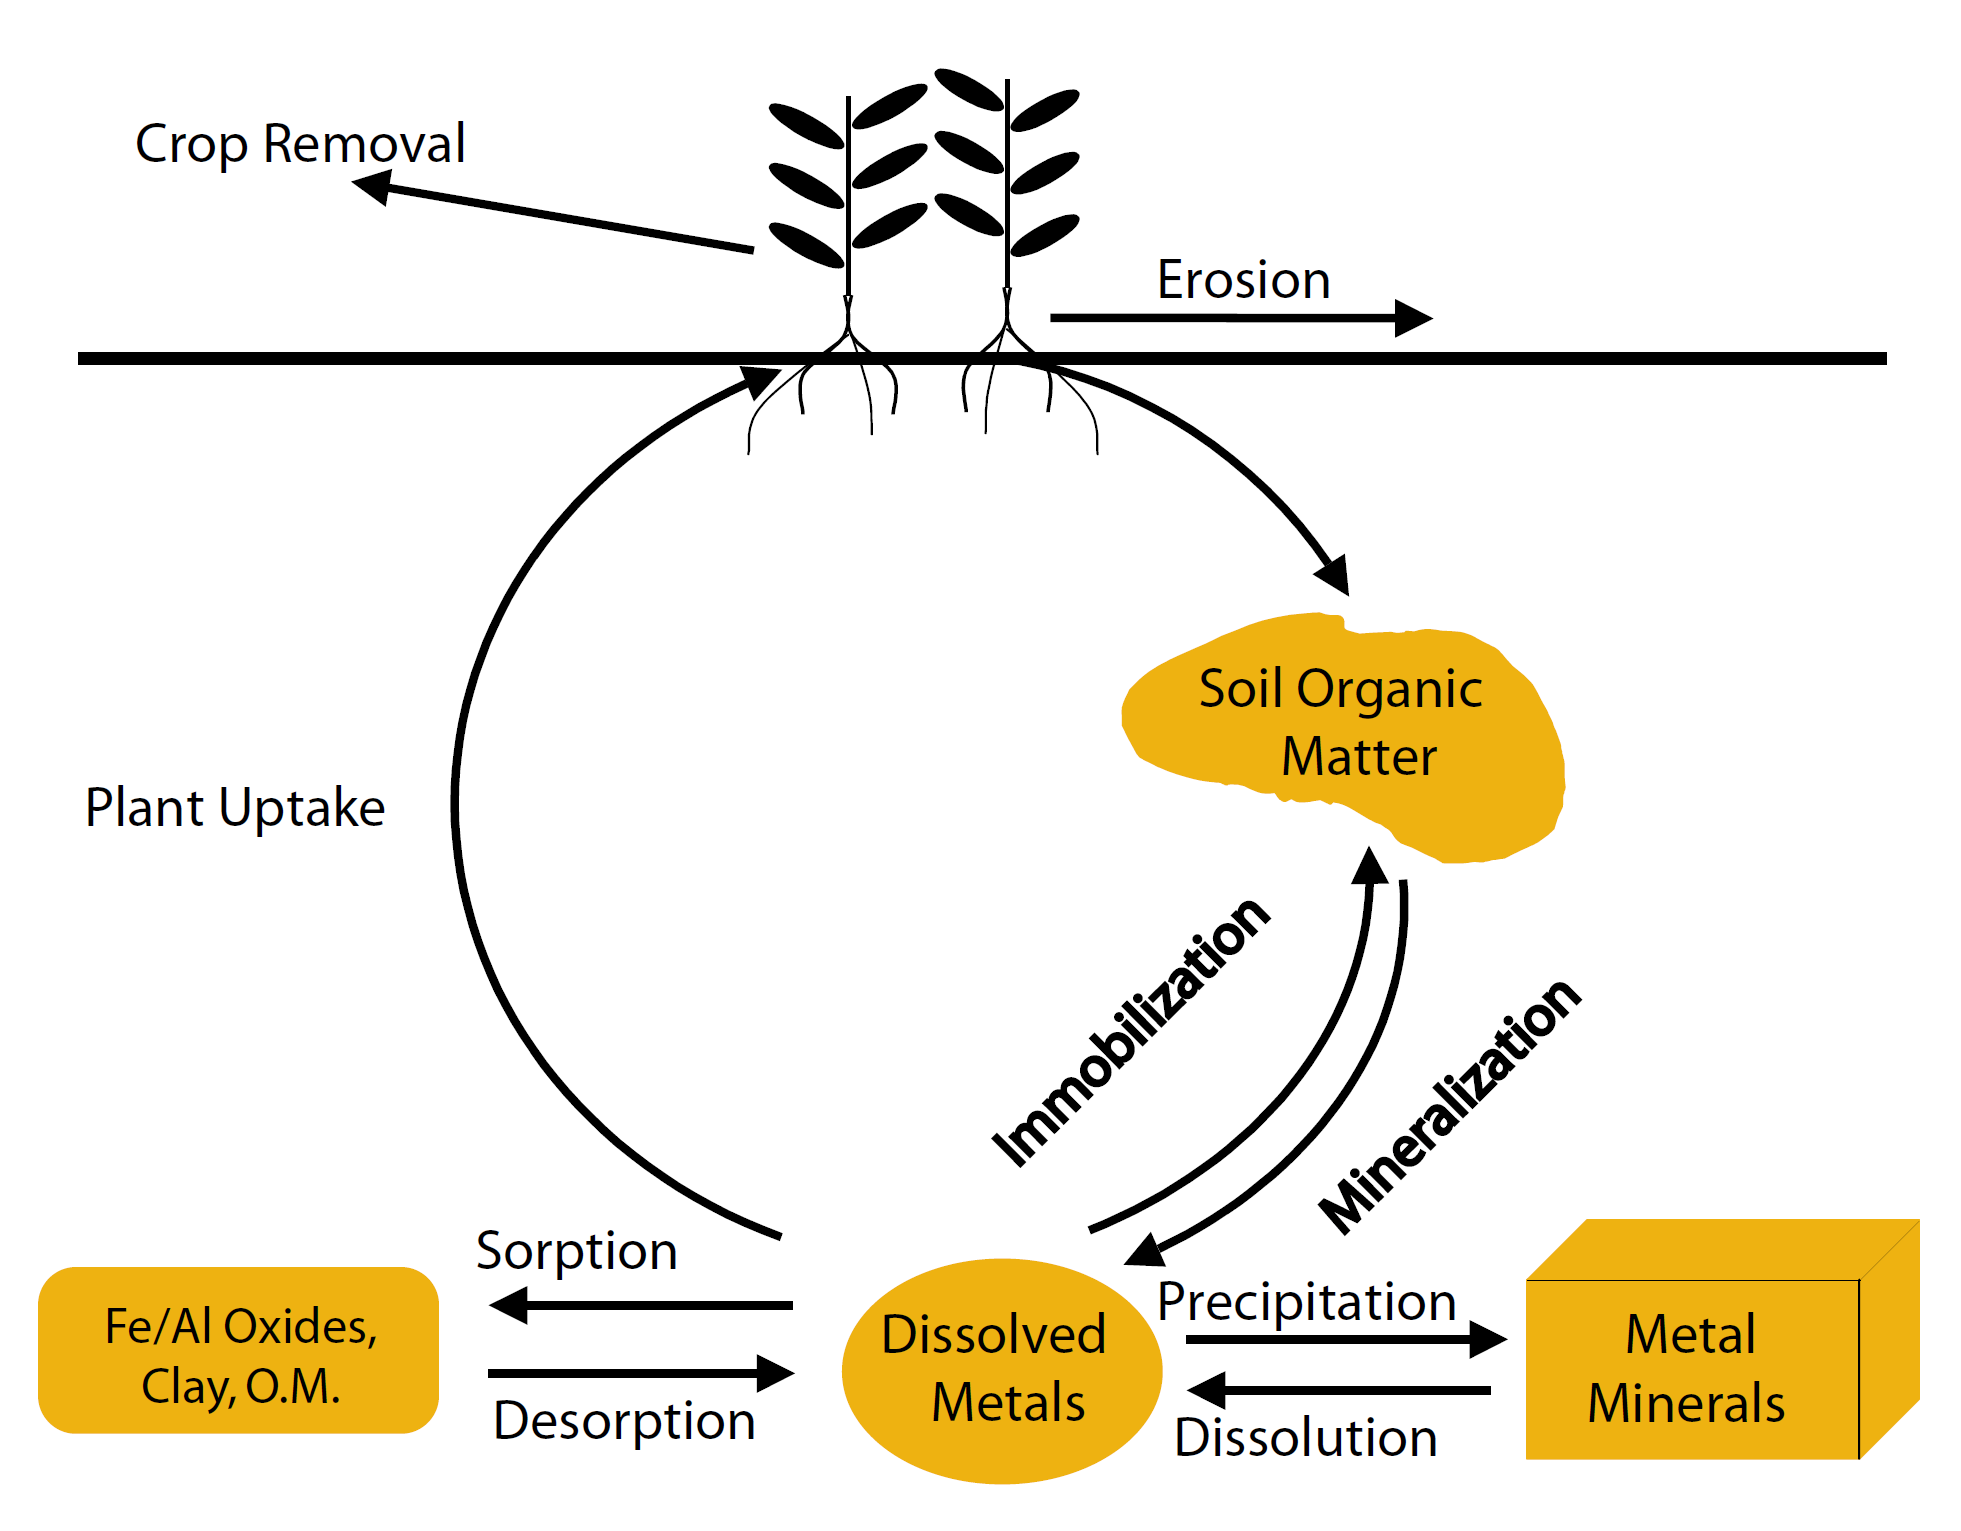 Graphic displaying the complex inputs and outputs of the metal micronutrient cycle